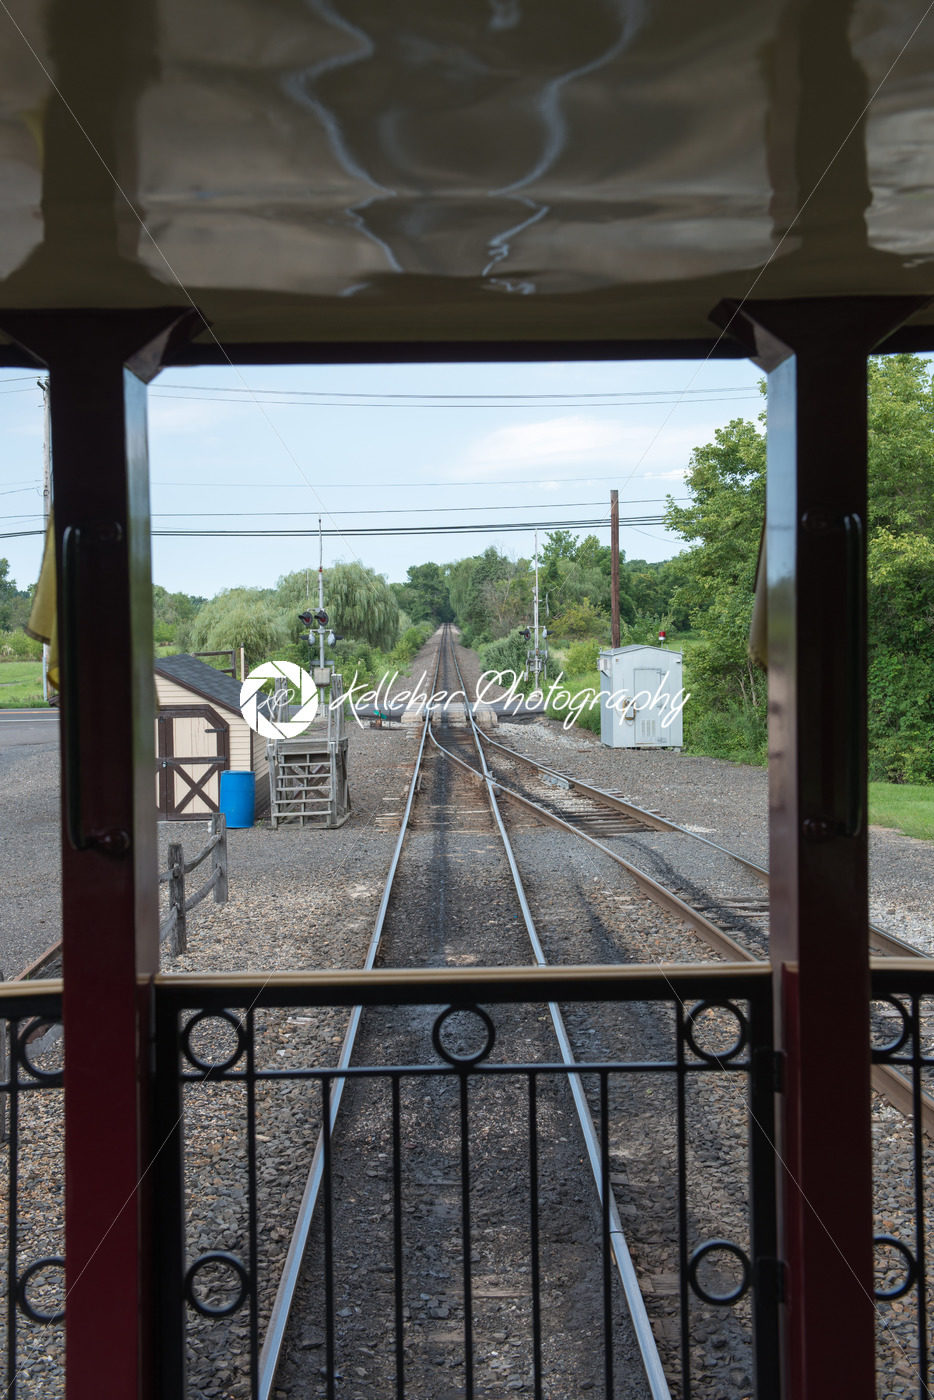 NEW HOPE, PA – AUGUST 11: The New Hope and Ivyland rail road is a heritage train line for visitors going on touristic excursions in Bucks County, Pennsylvania on August 11, 2013 - Kelleher Photography Store